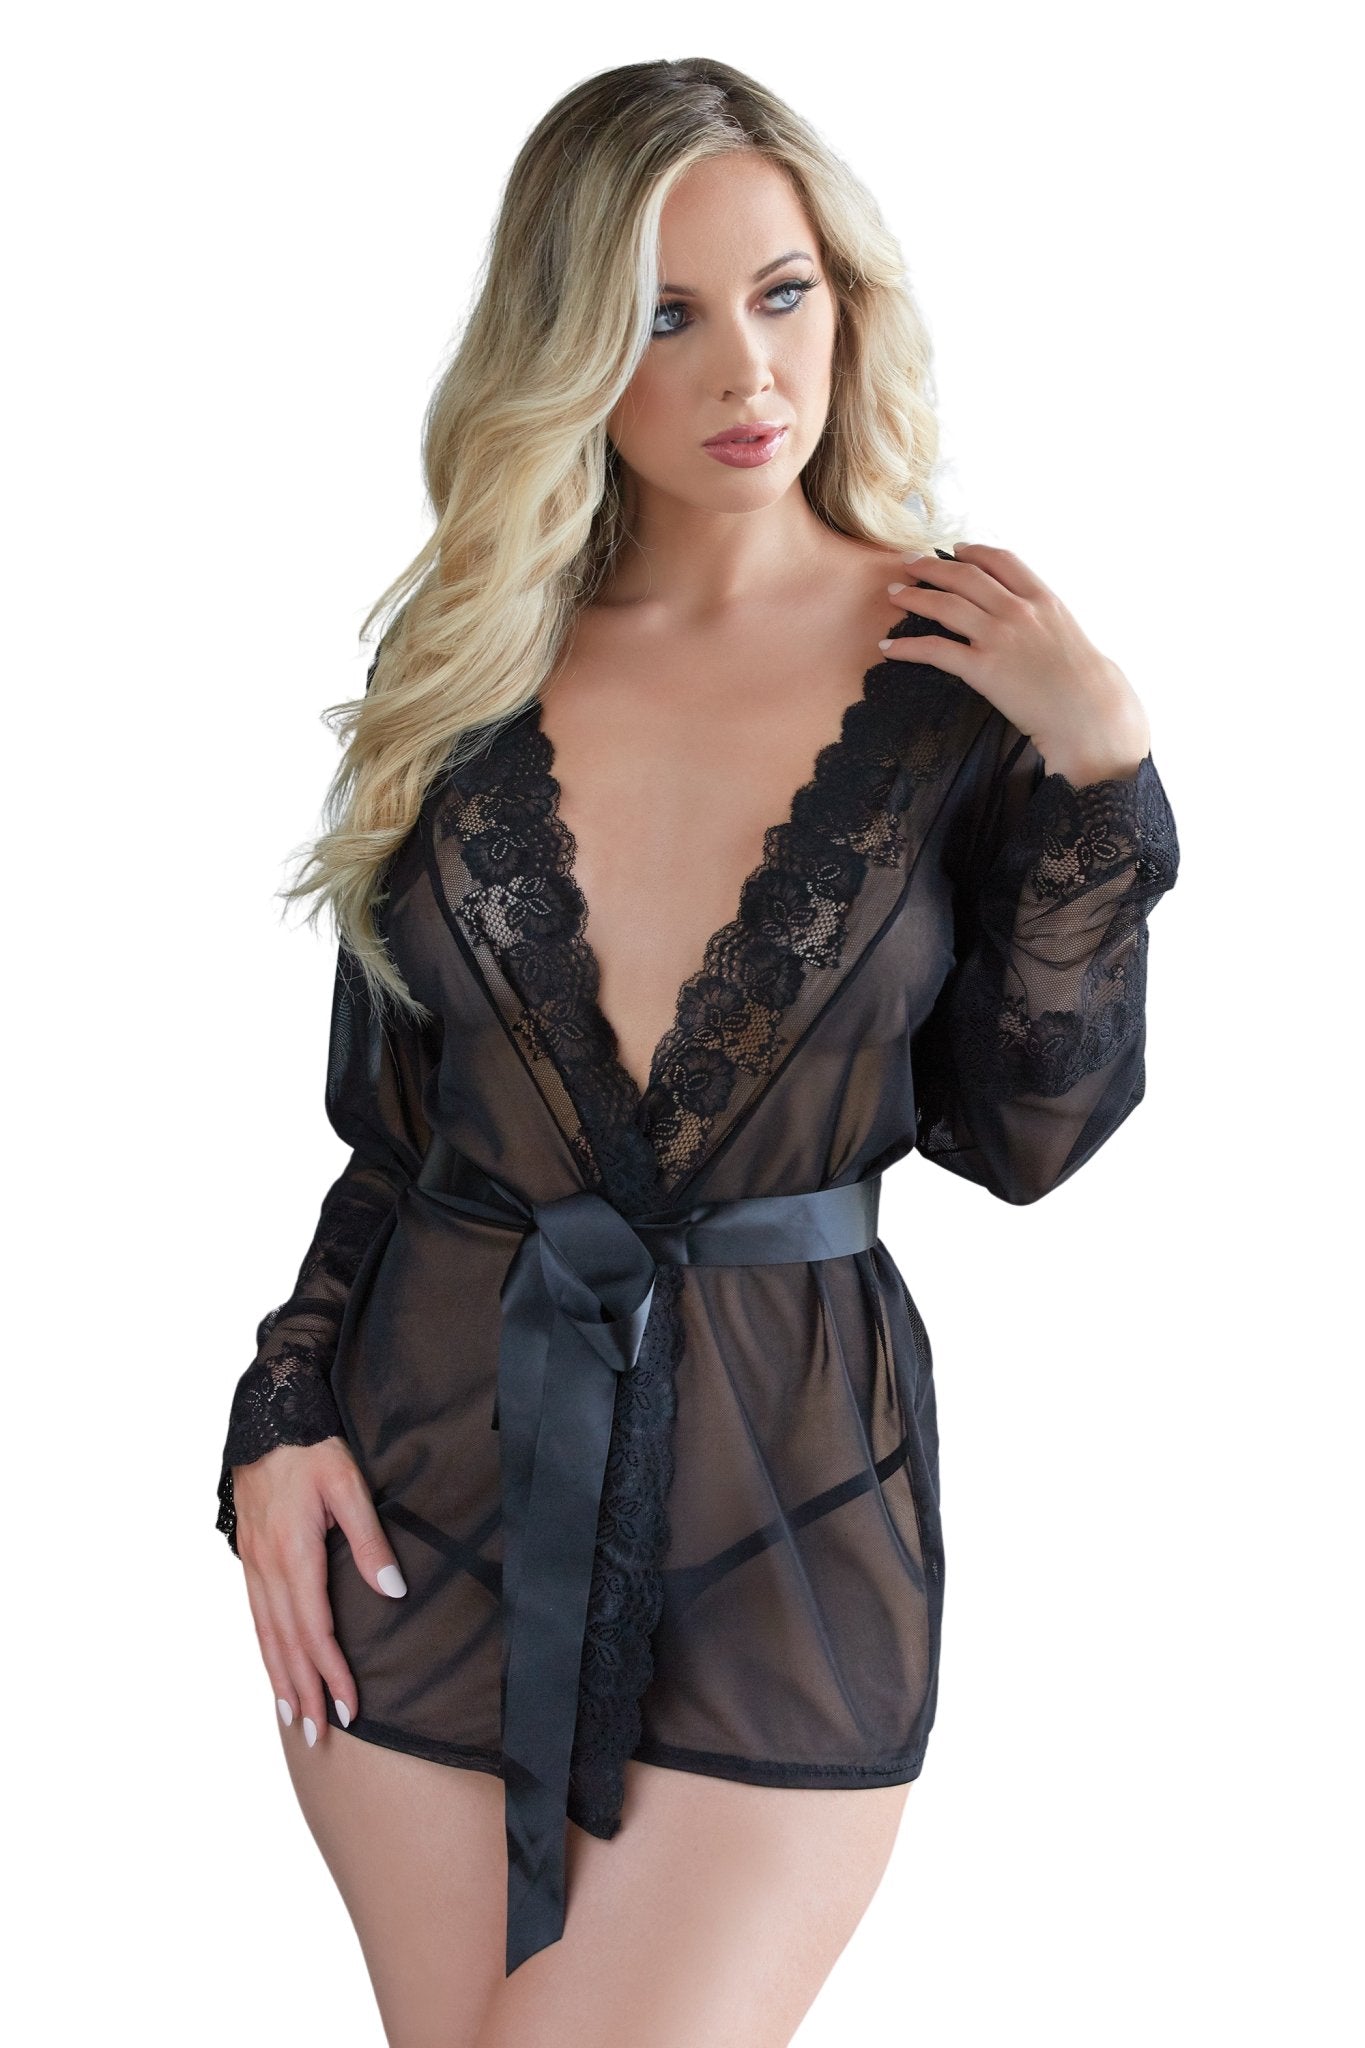 Delicate Lace Robe and G-string DuoMusotica.com